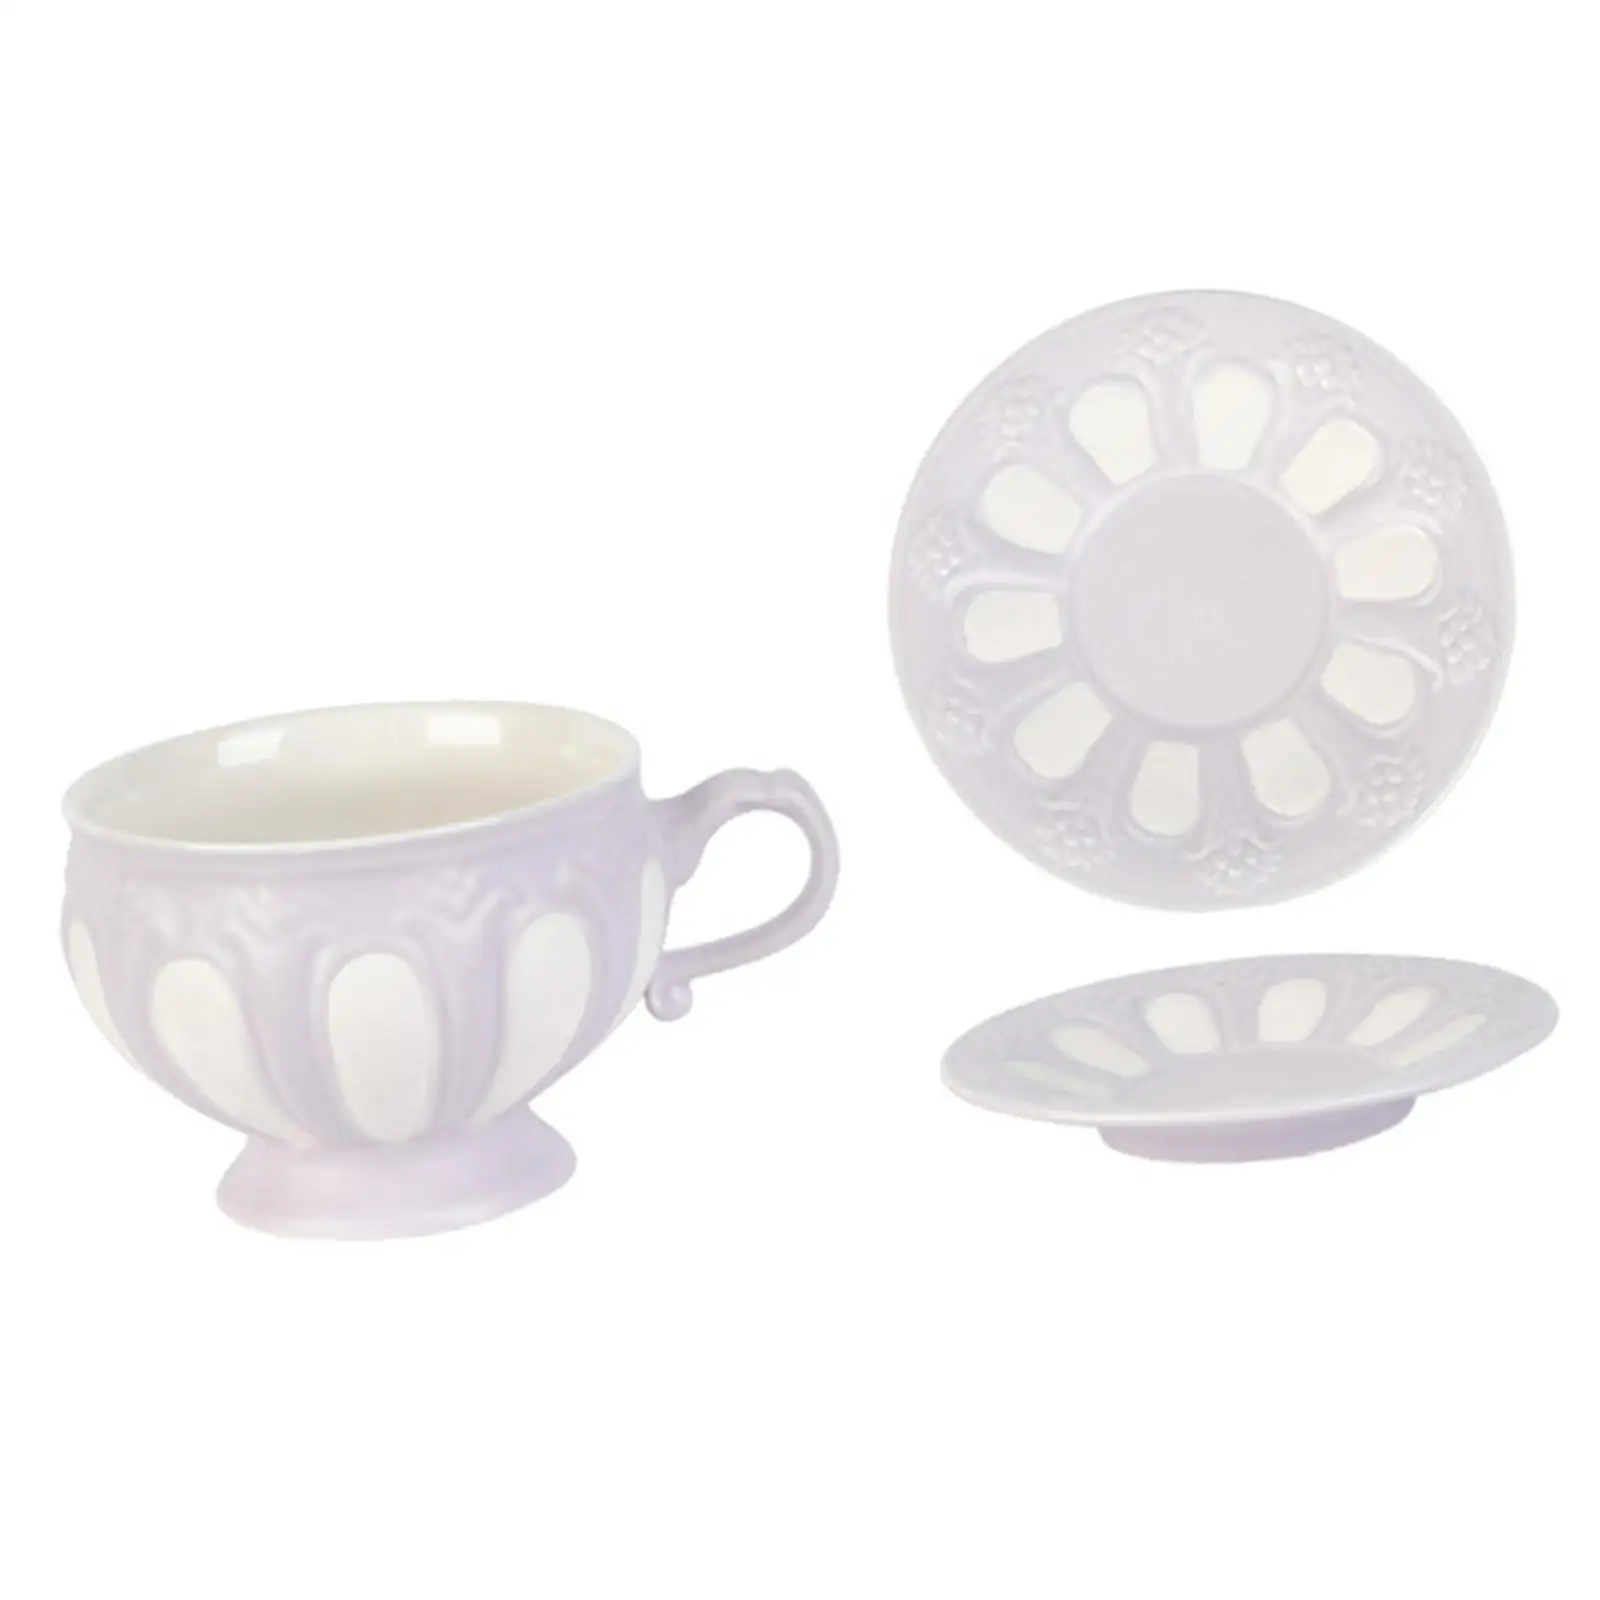 Ceramic Coffee Porcelain Tea Cups Creative Afternoon Tea Set Coffee and Saucer for Hot Chocolate Latte